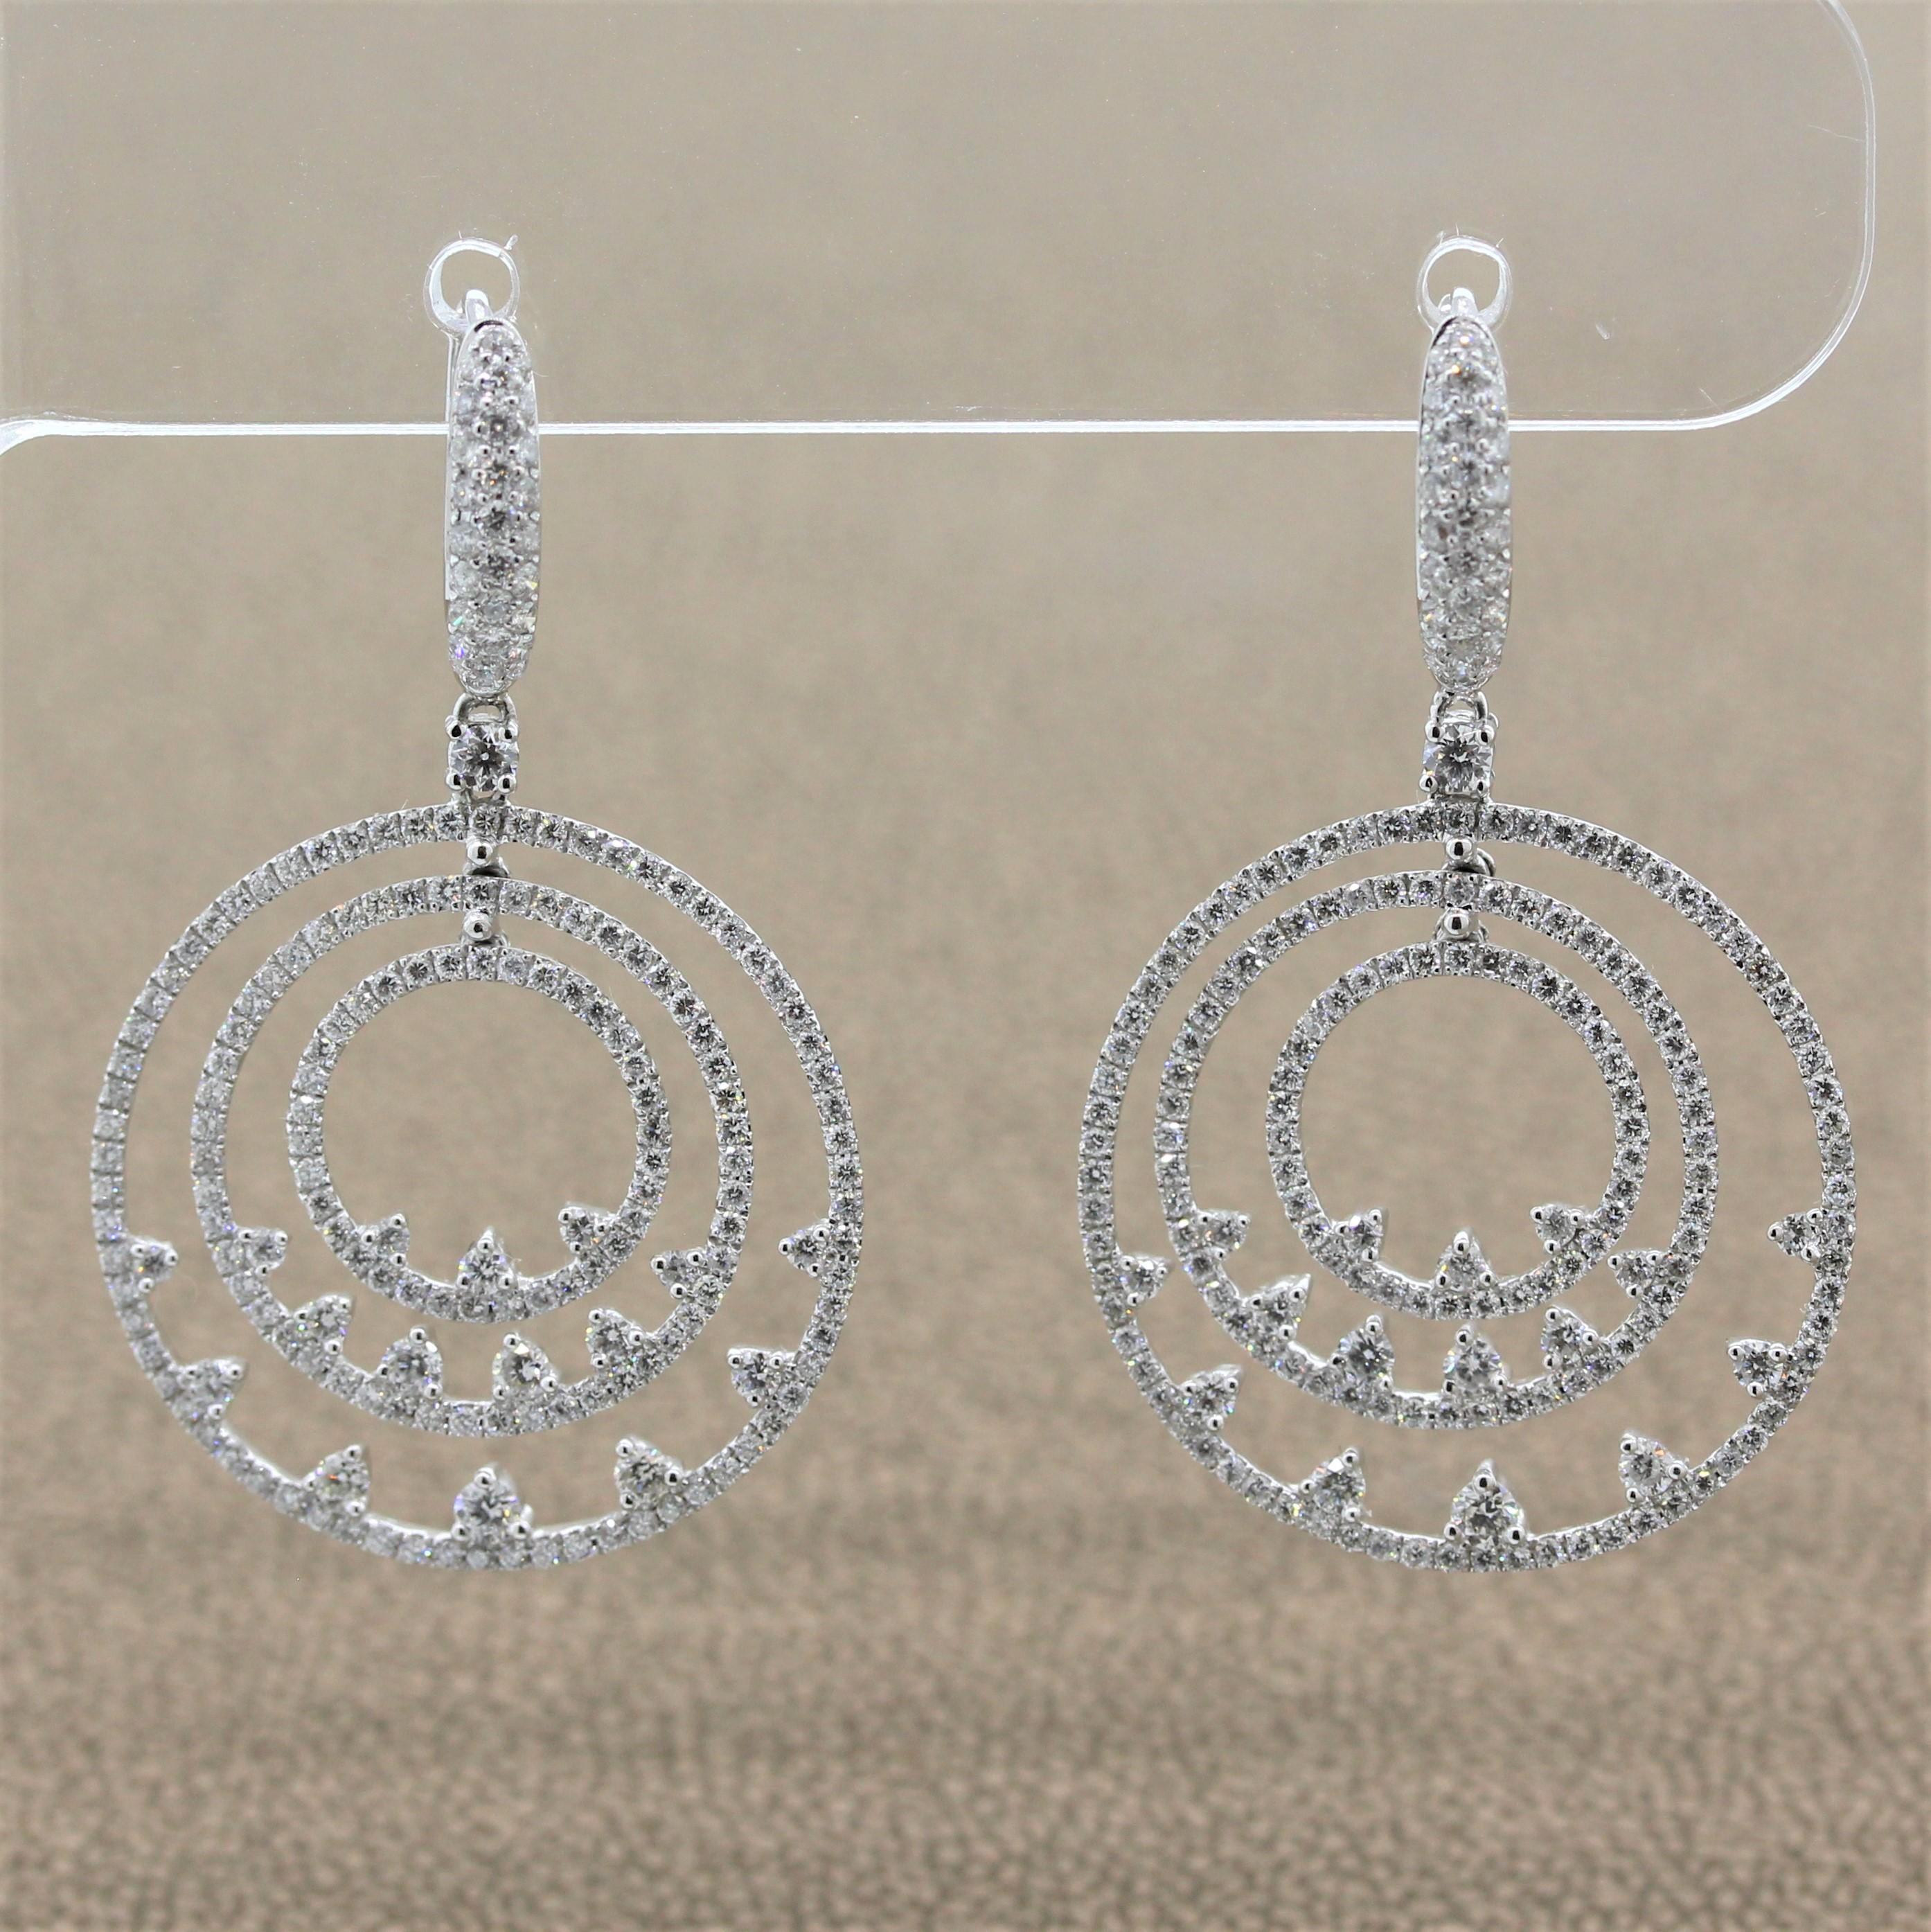 A fun pair of drop earrings with three graduating hoops. The free-flowing halos are studded with 2.23 carats of round brilliant cut diamonds with a diamond design on the inside portion of each halo in an 18K white gold setting. A true piece of fine